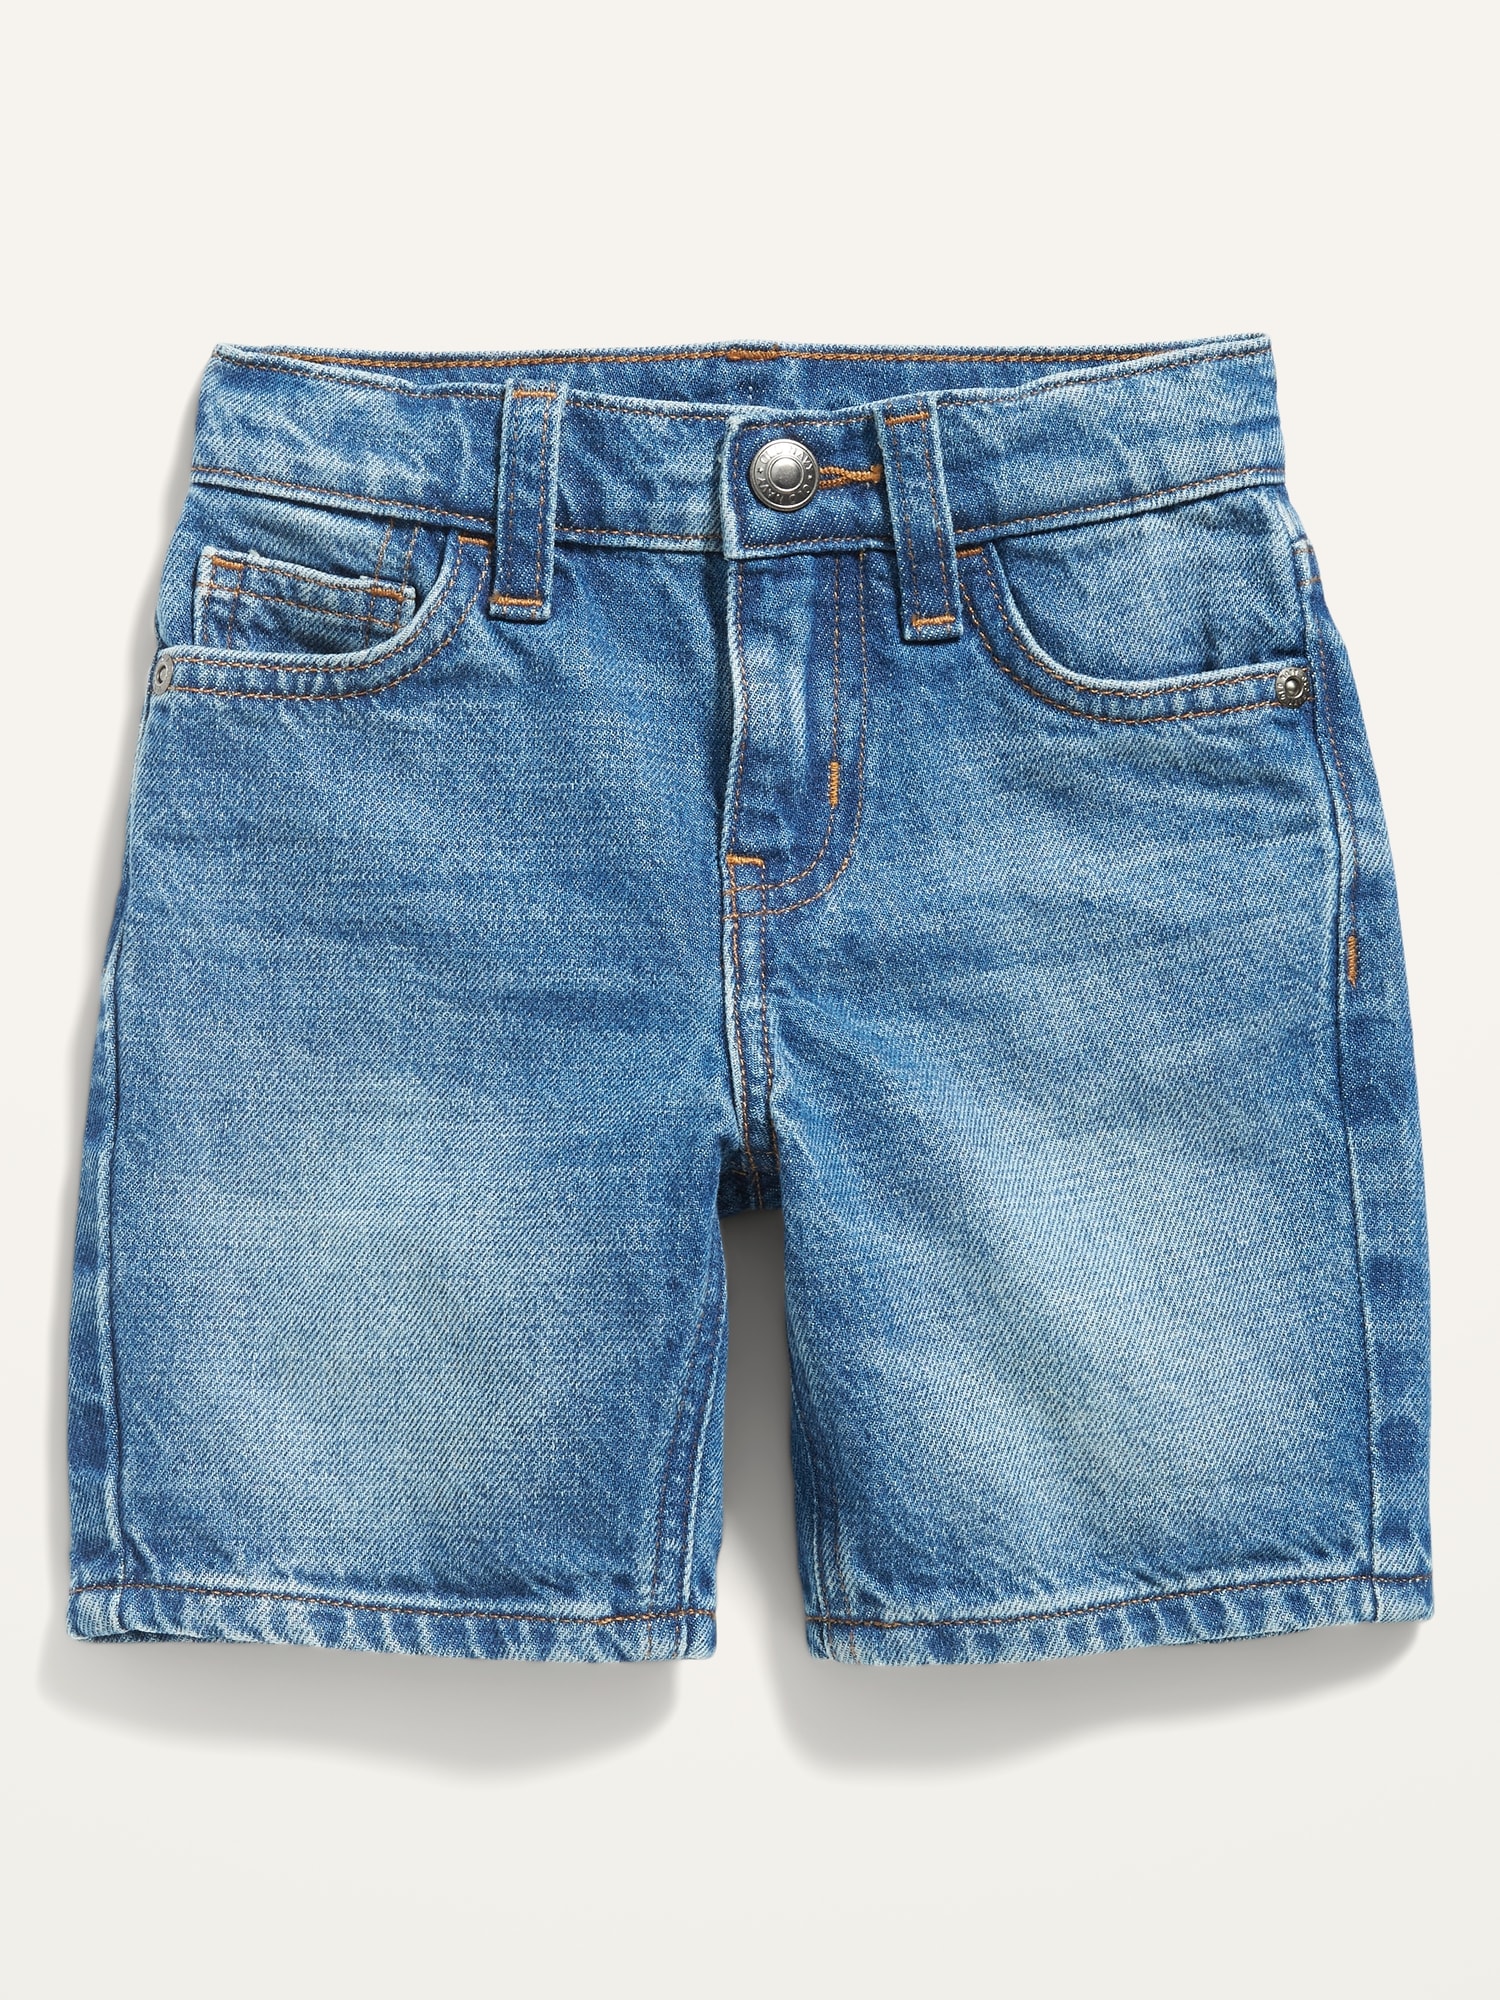 Old Navy Loose Jean Shorts for Toddler Boys blue. 1